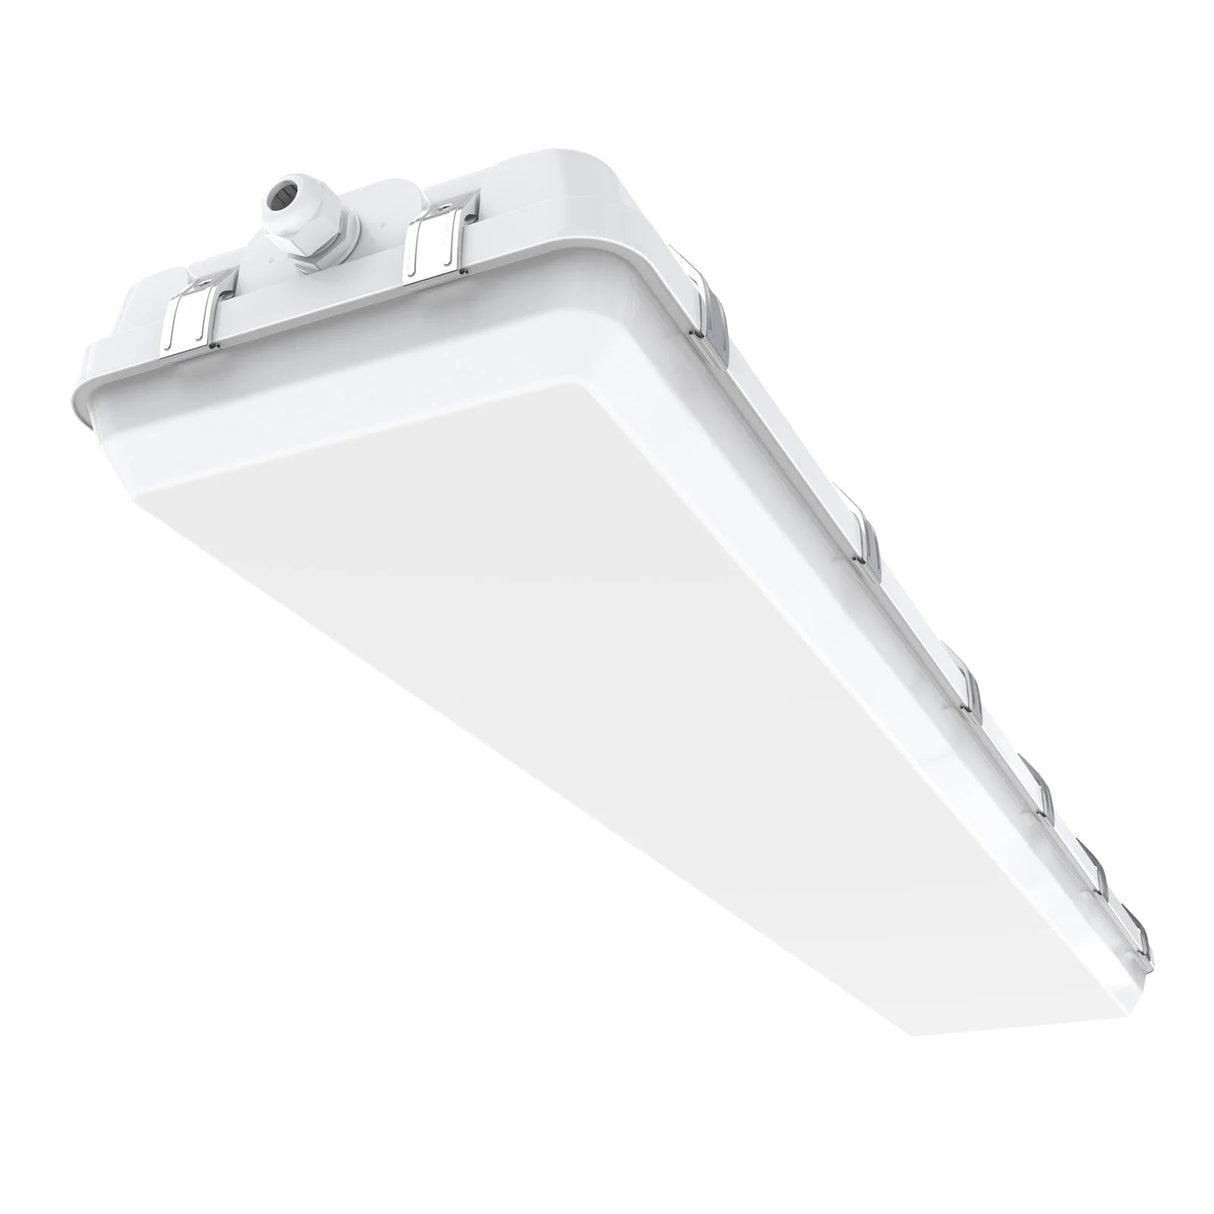 Waterproof shop lights can be used in different working environments